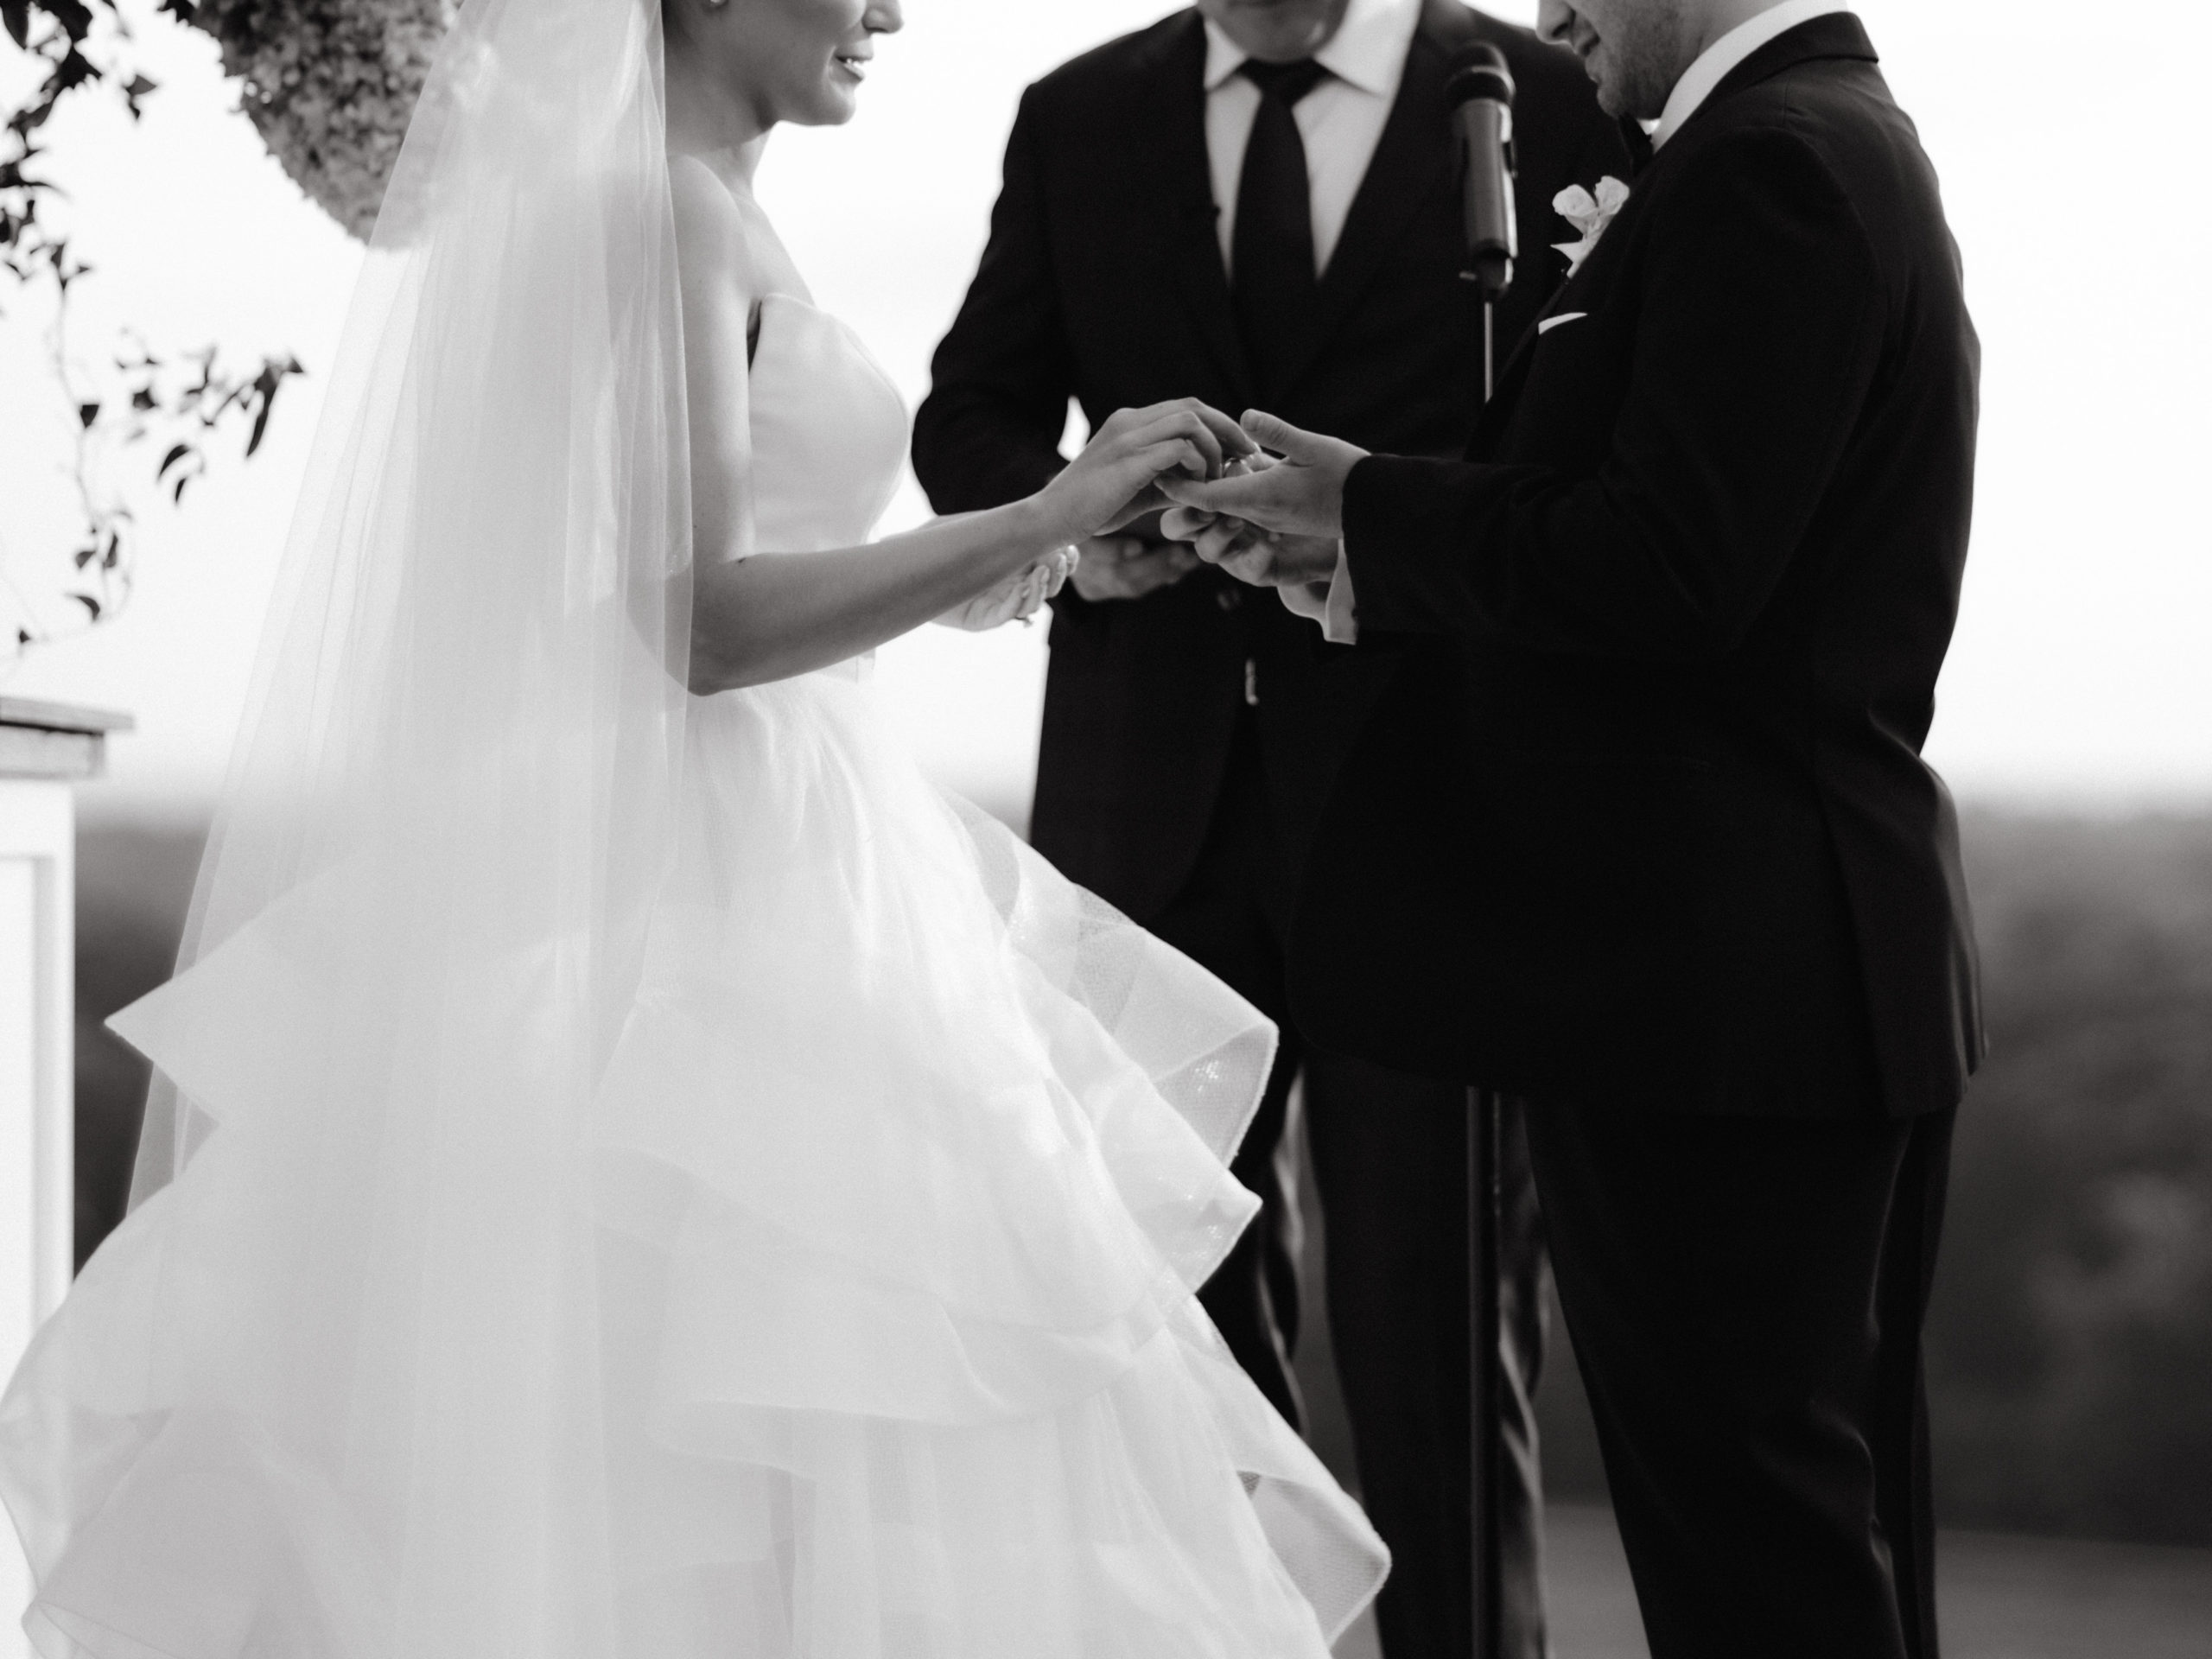 Black and white photo of the wedding bride and groom saying vows. NYC wedding photographer cost image by Jenny Fu Studio.